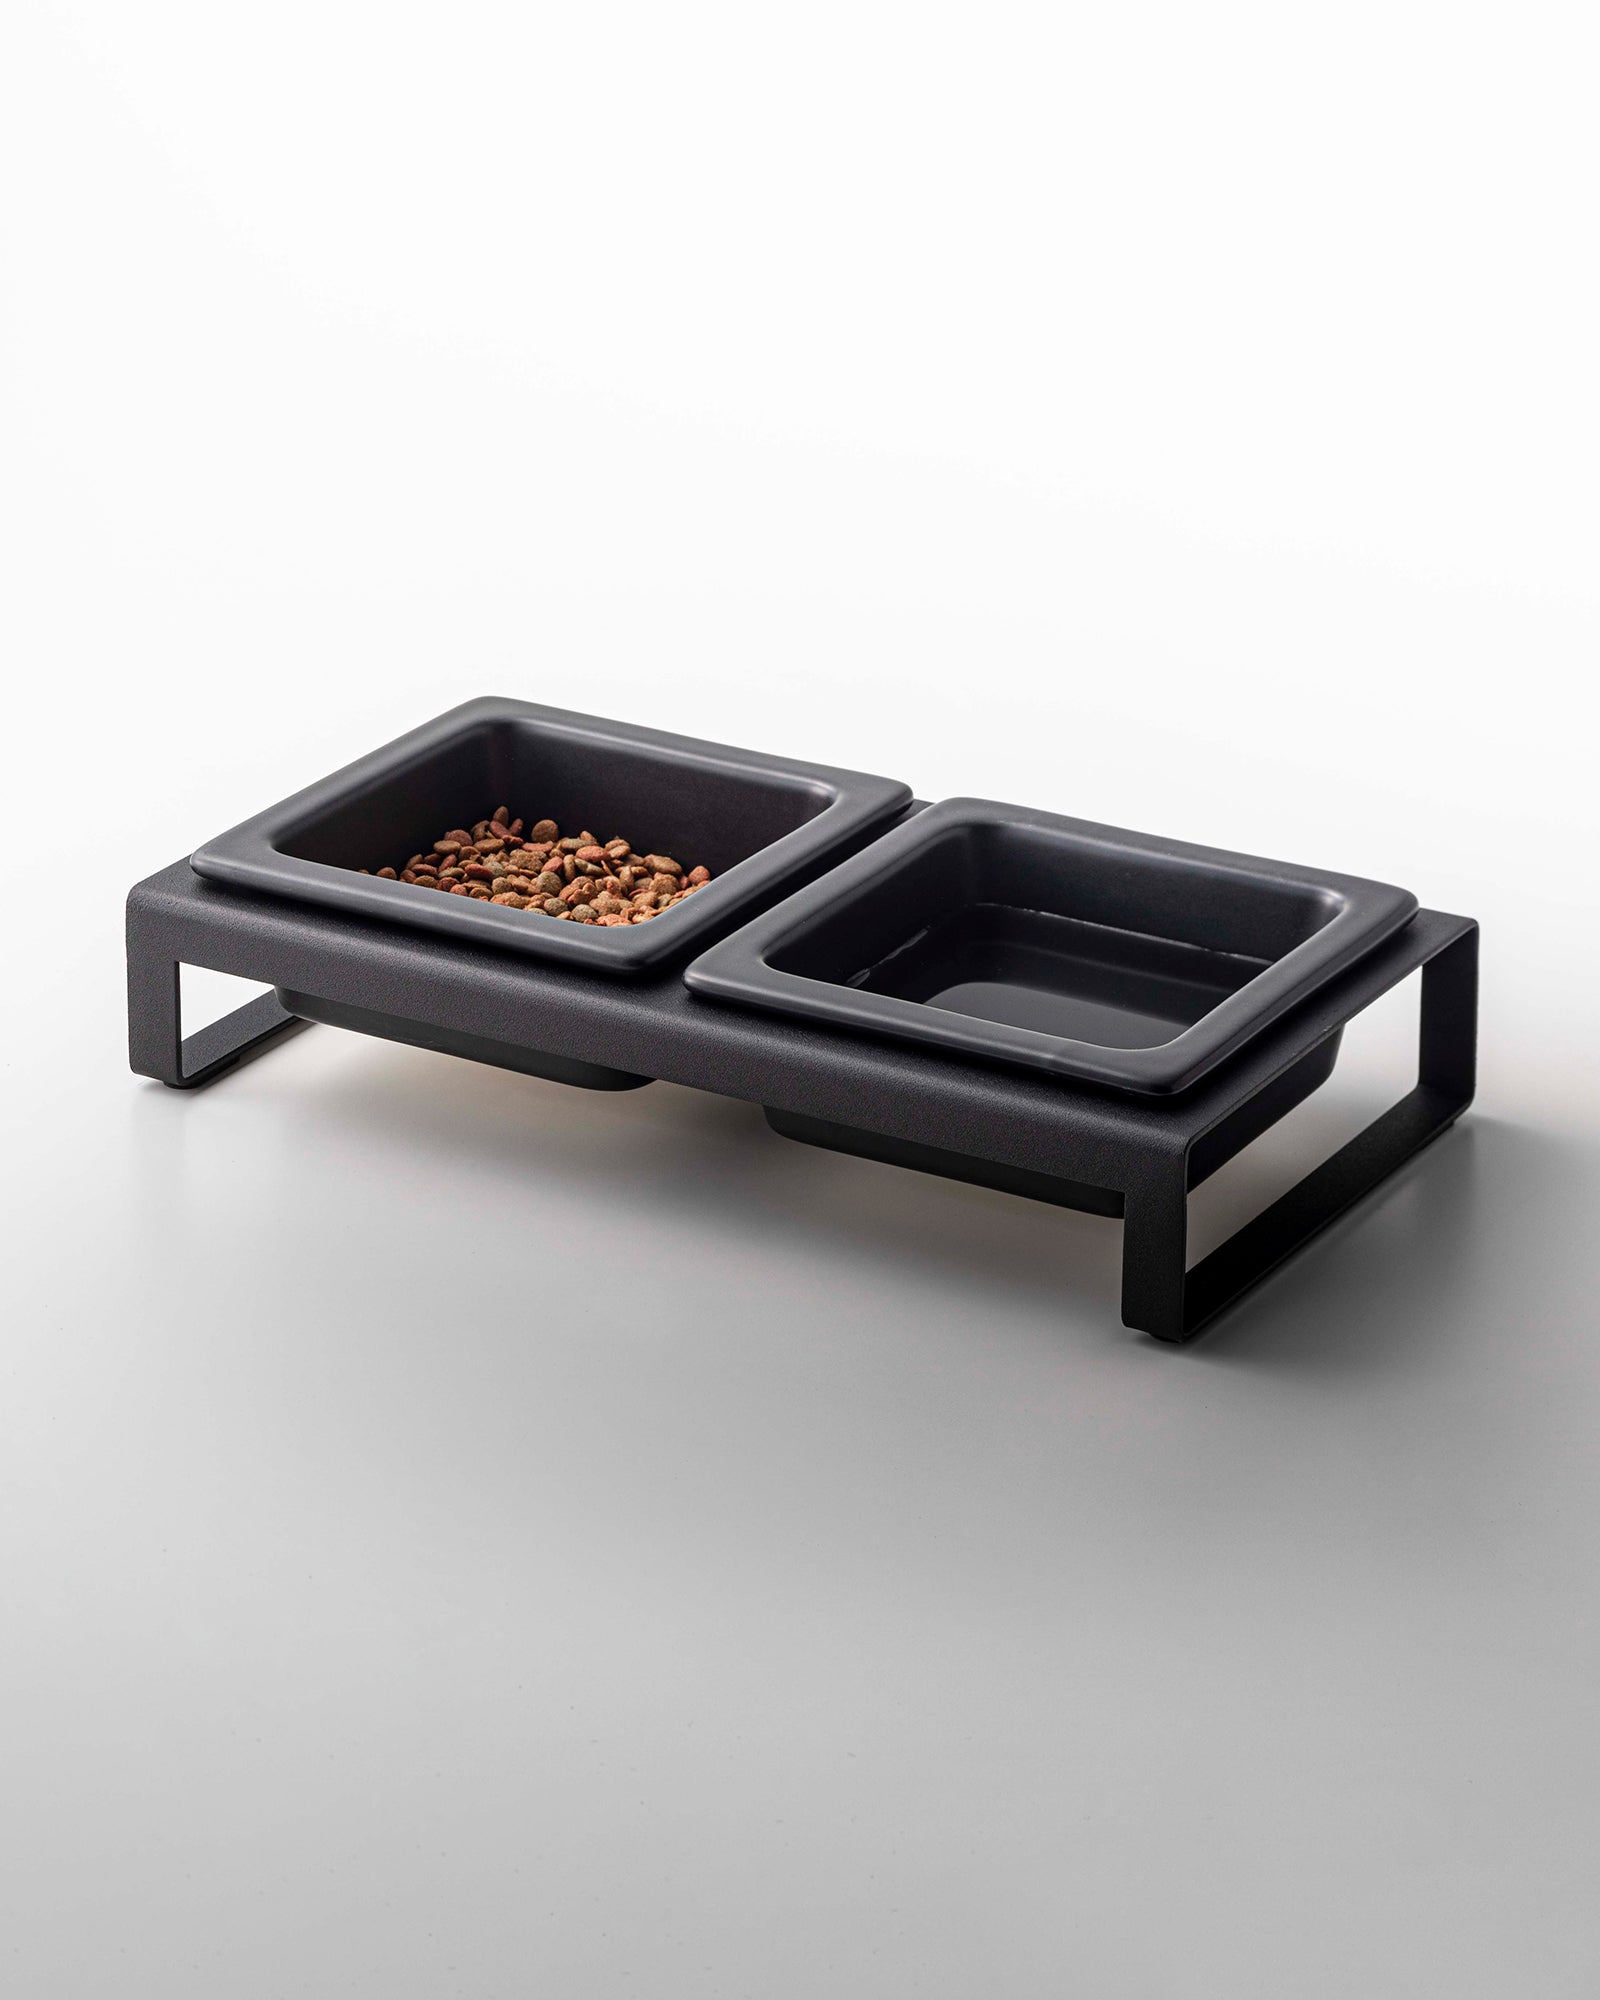 A black Pet Food Bowl with two ceramic bowls for pet food from Yamazaki Home.